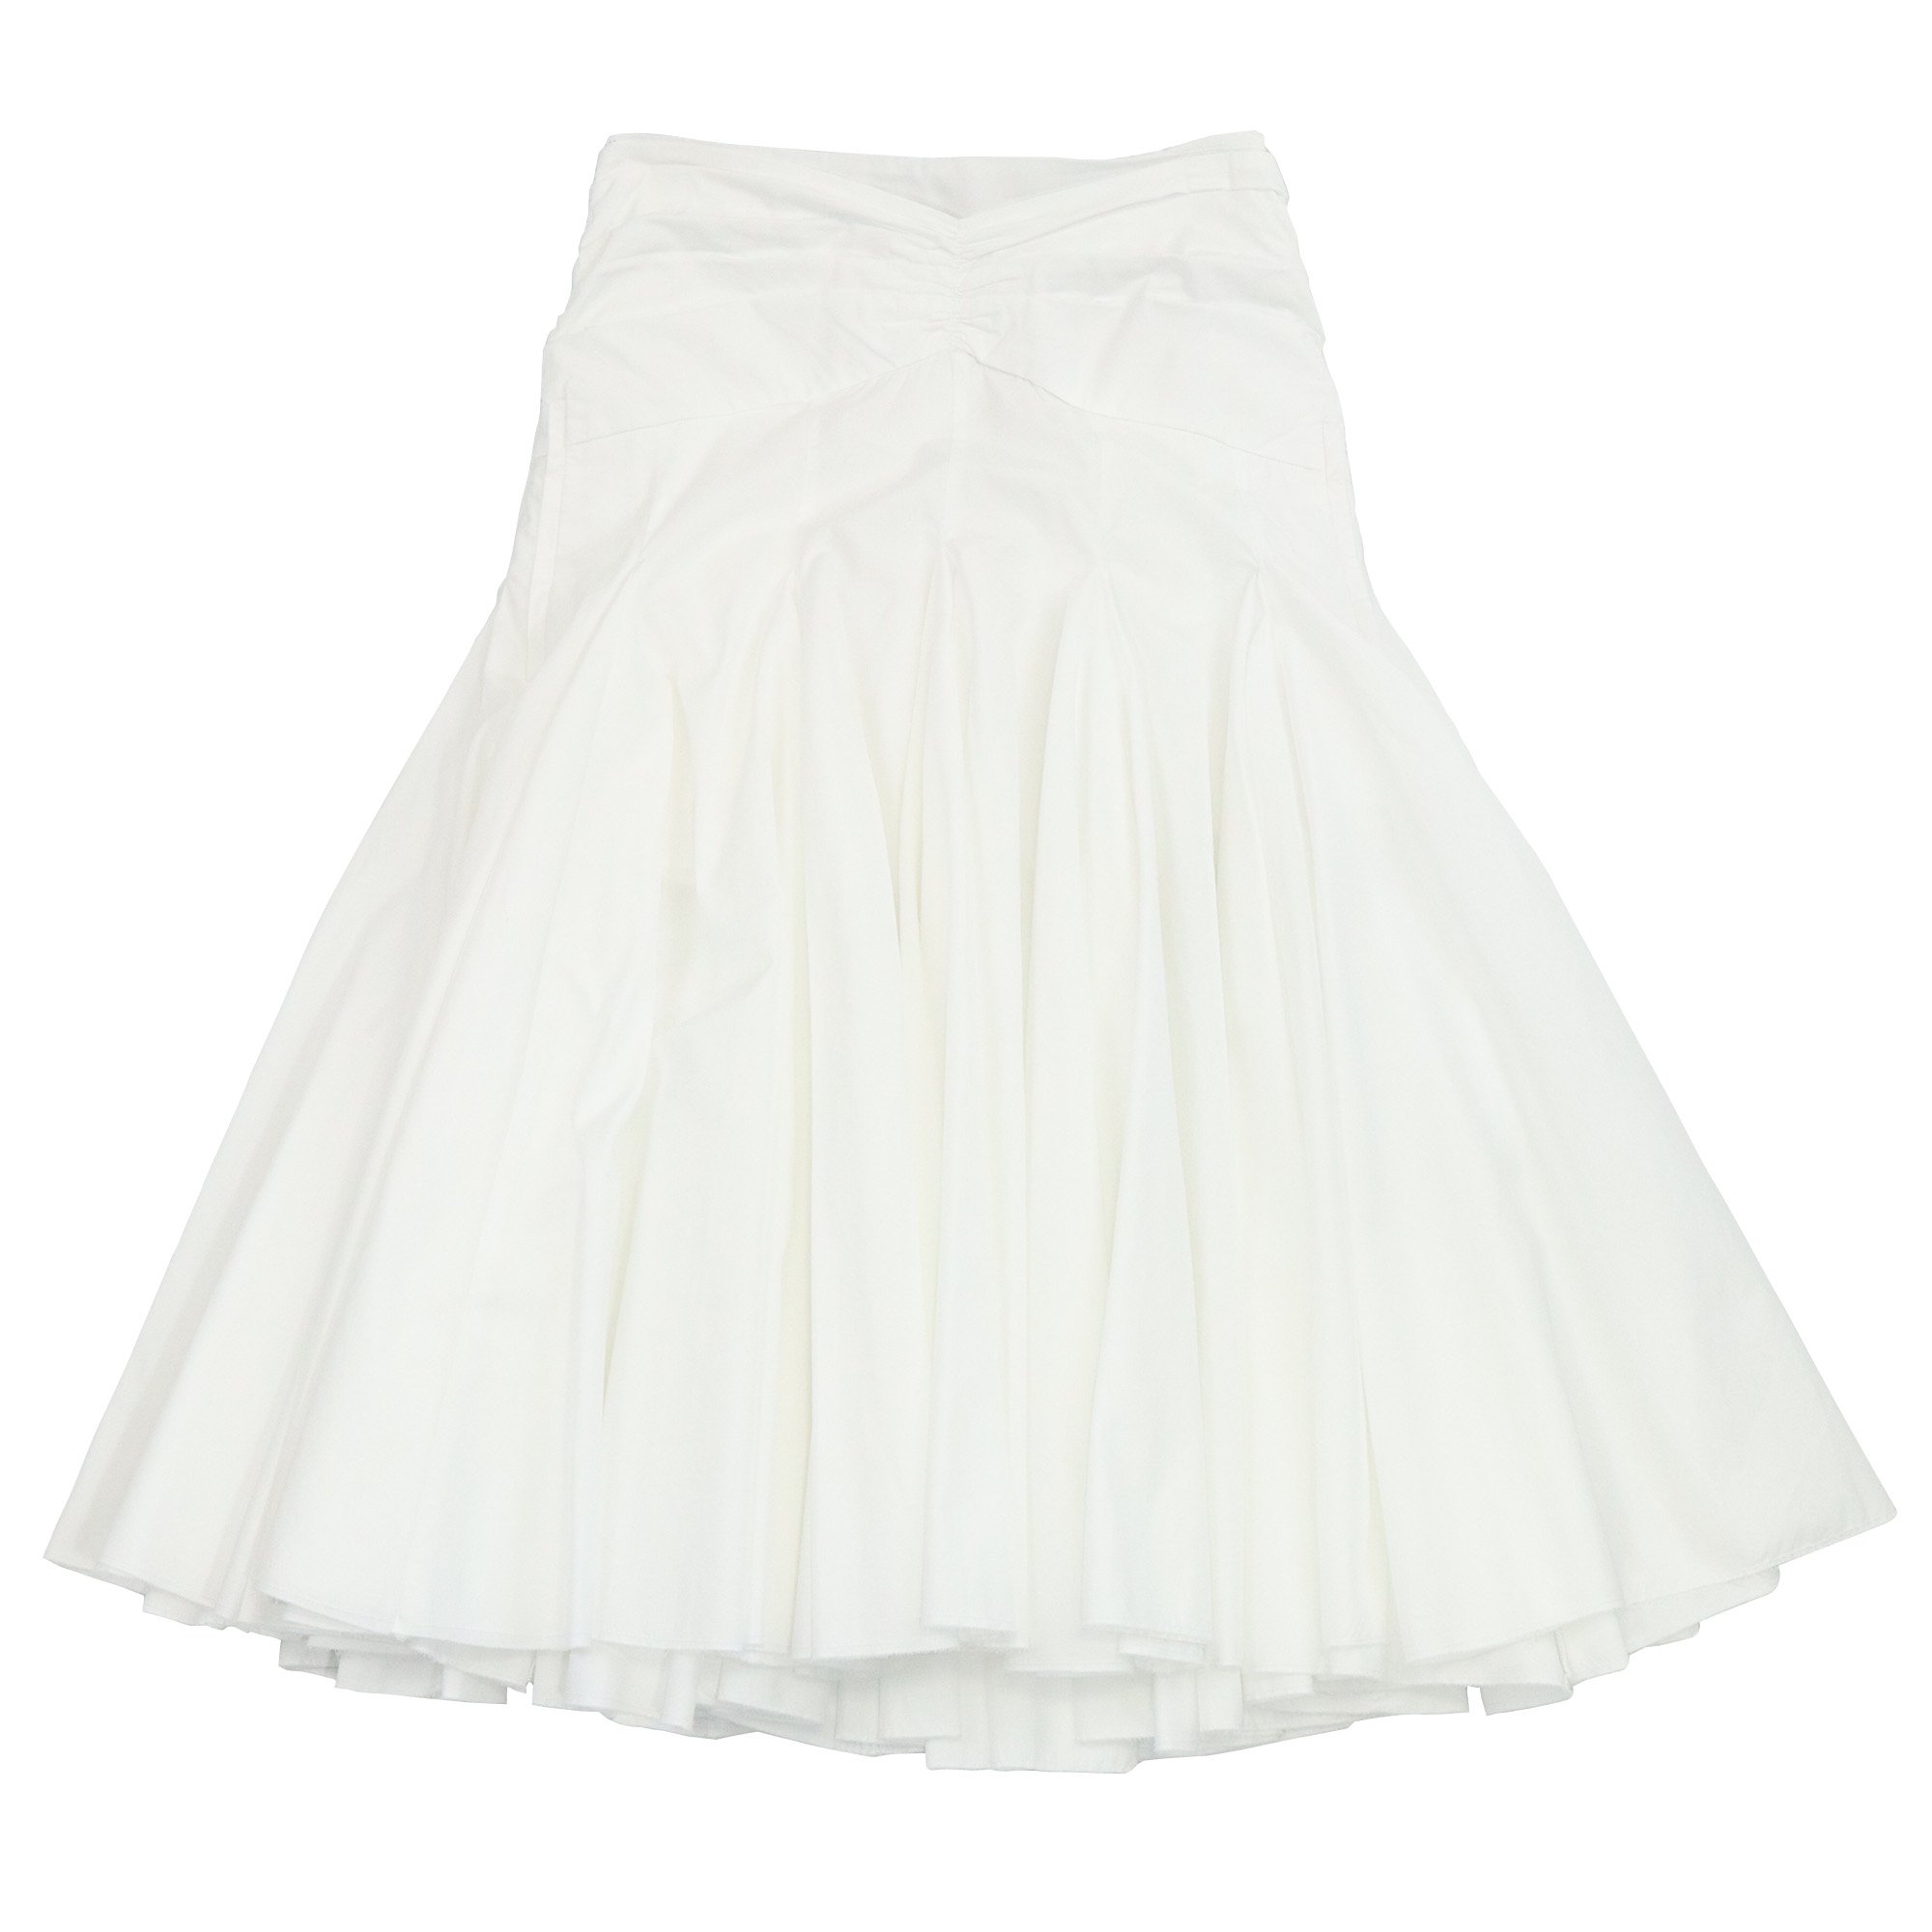 <img class='new_mark_img1' src='https://img.shop-pro.jp/img/new/icons6.gif' style='border:none;display:inline;margin:0px;padding:0px;width:auto;' />N°21 Cotton skirt 【WHITE】